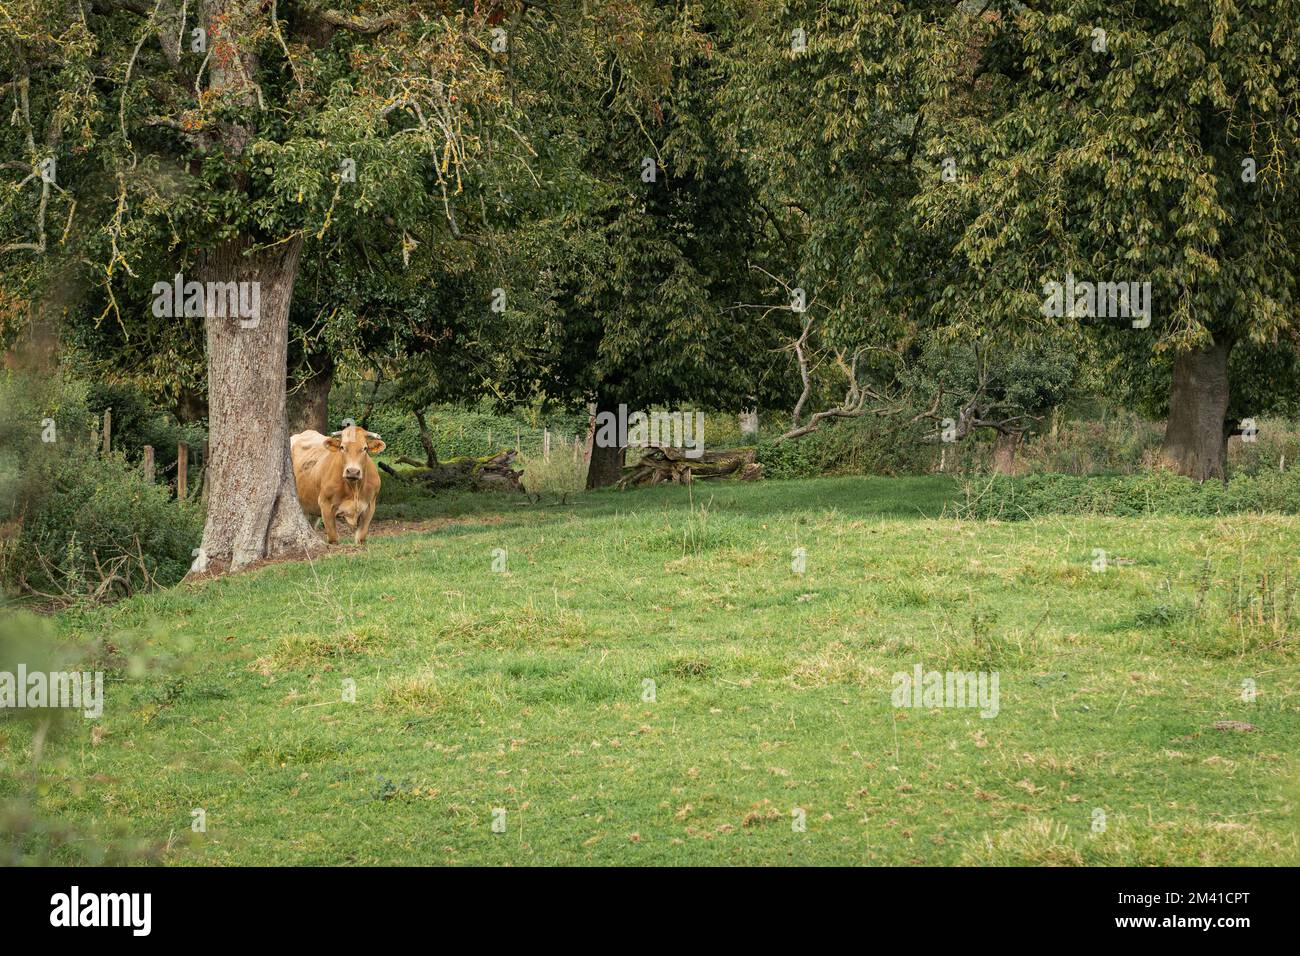 Farm in the forest area. A field with a cow in it. Stock Photo